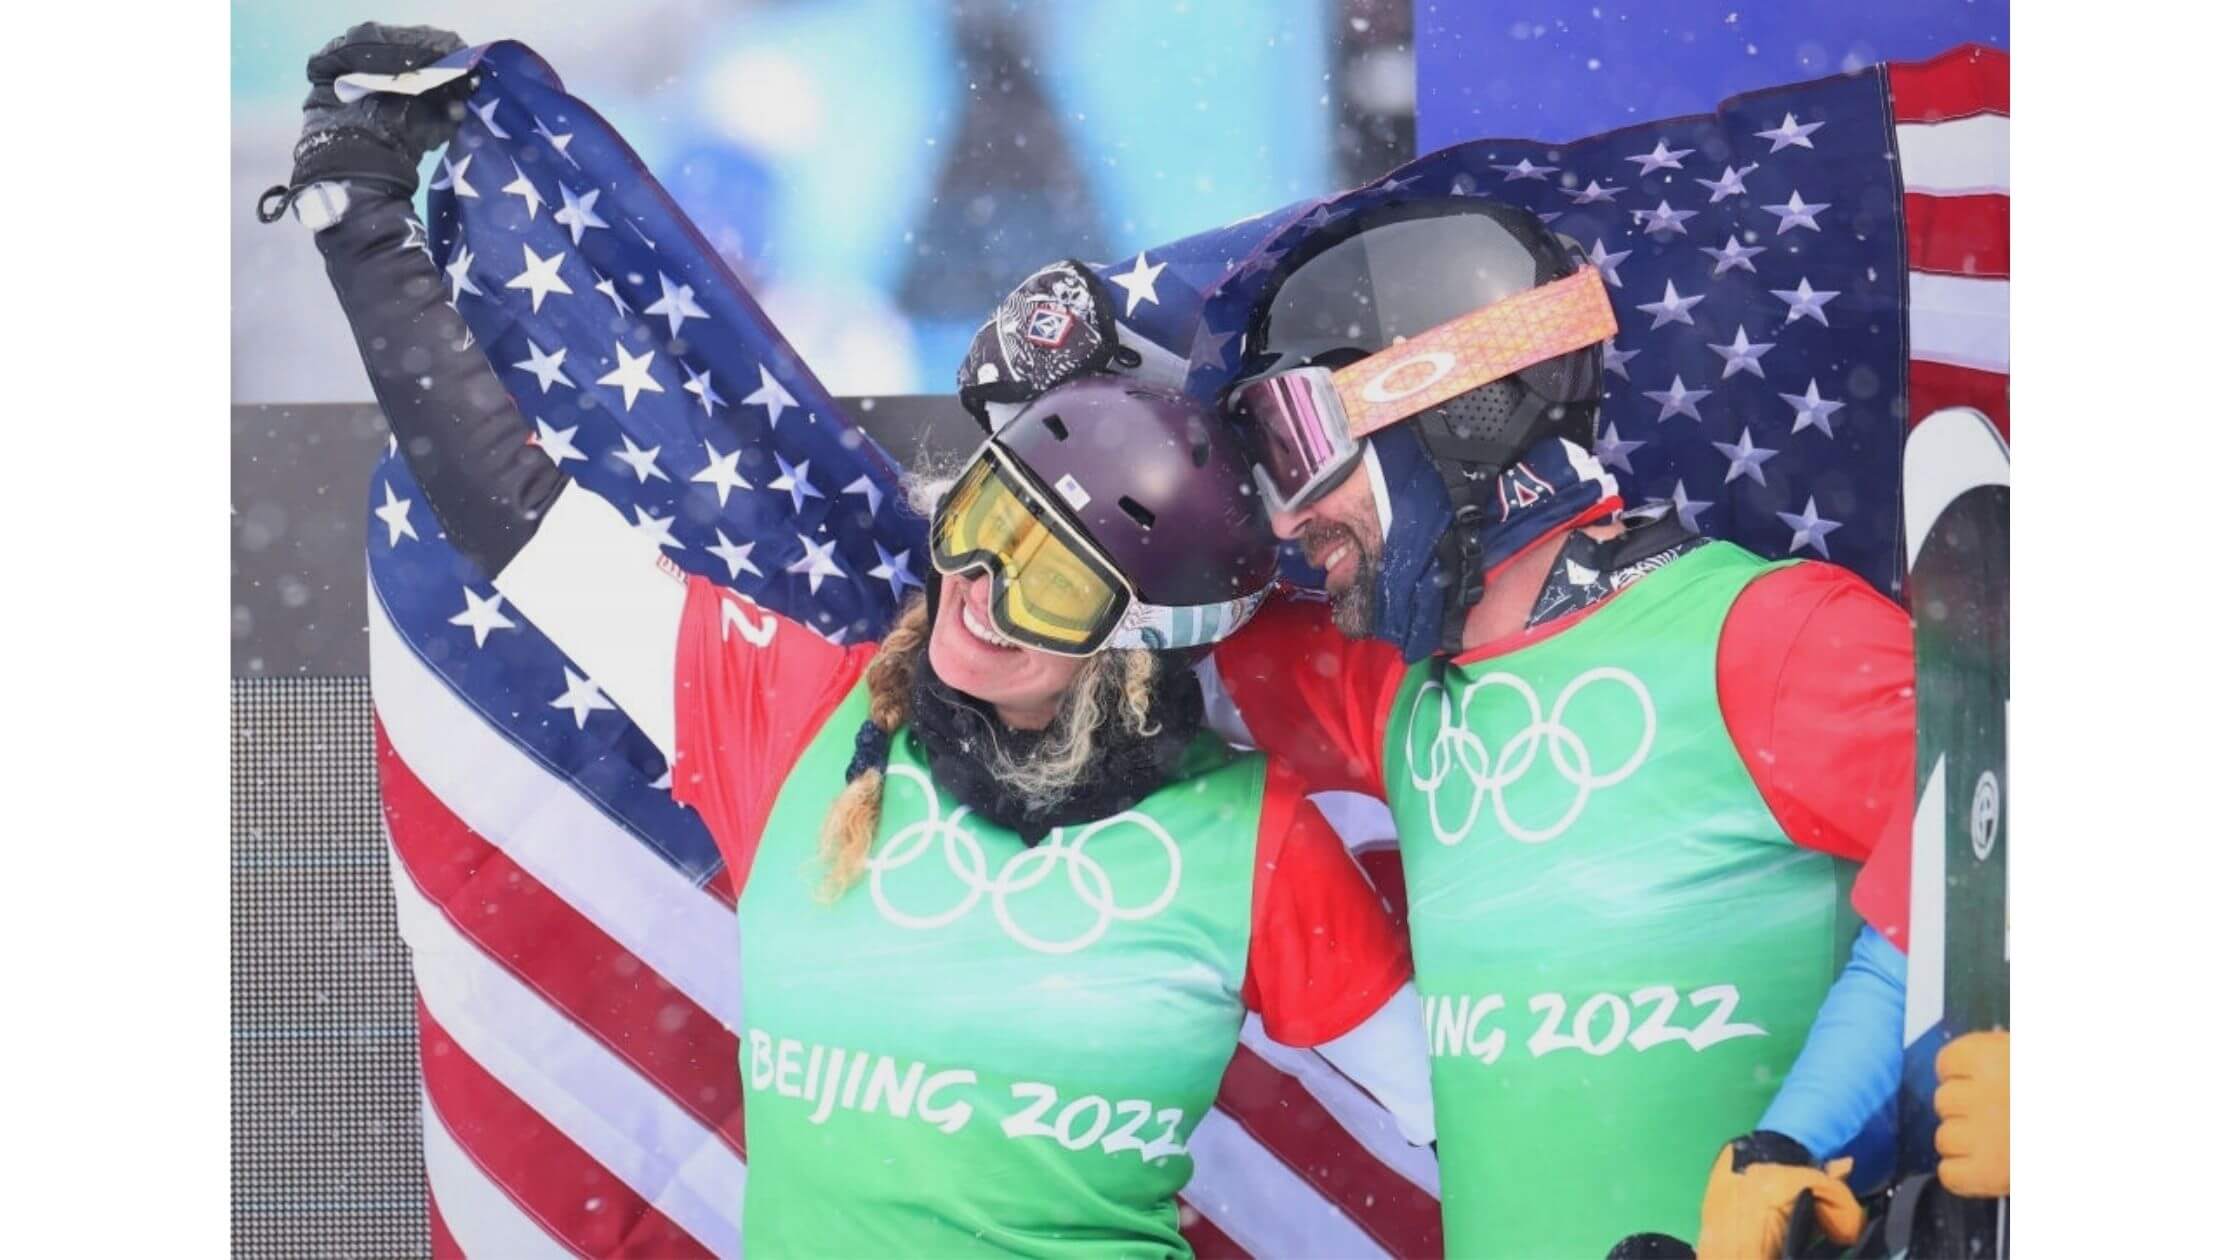 The Oldest Pair Of Snowboard Cross Mixed Of Nick Baumgartner And Lindsey Jacobellis From The USA Won Gold In Winter Olympics